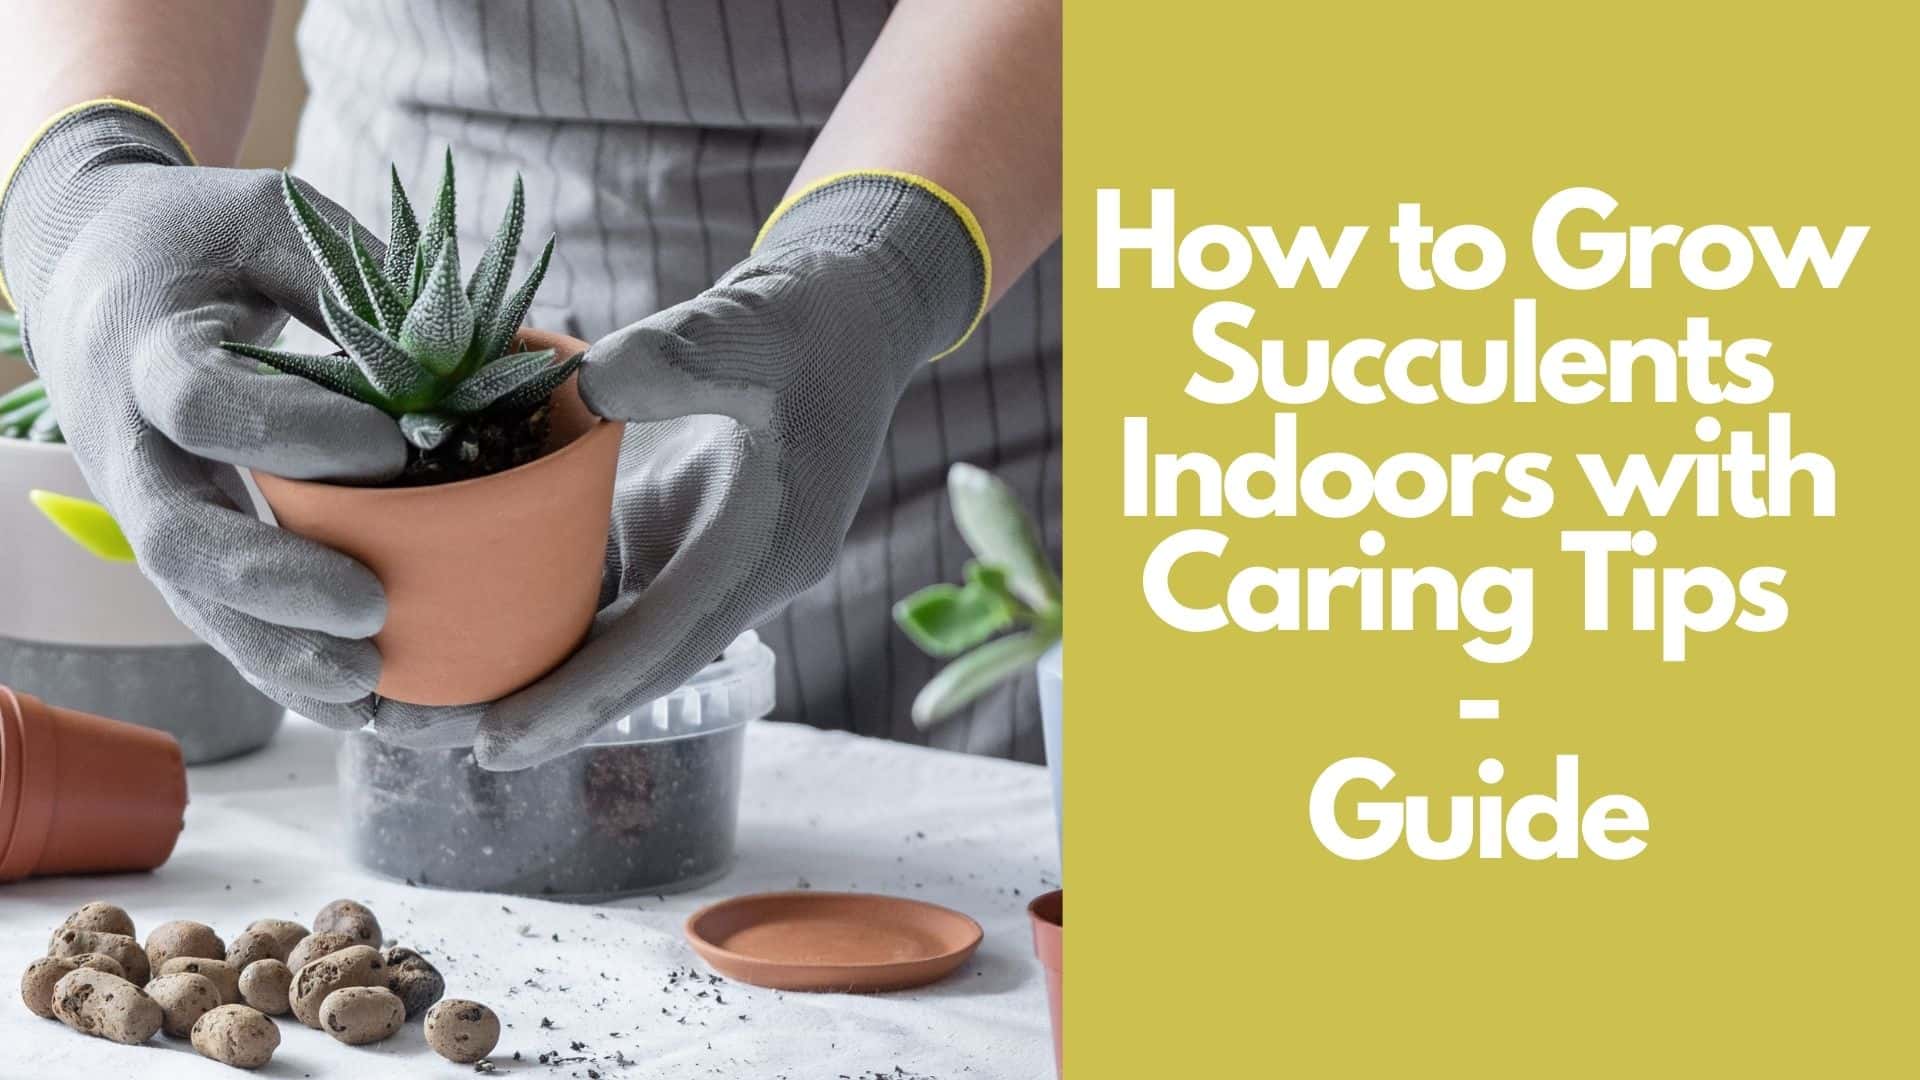 How to Grow Succulents Indoors with Caring Tips  Guide 